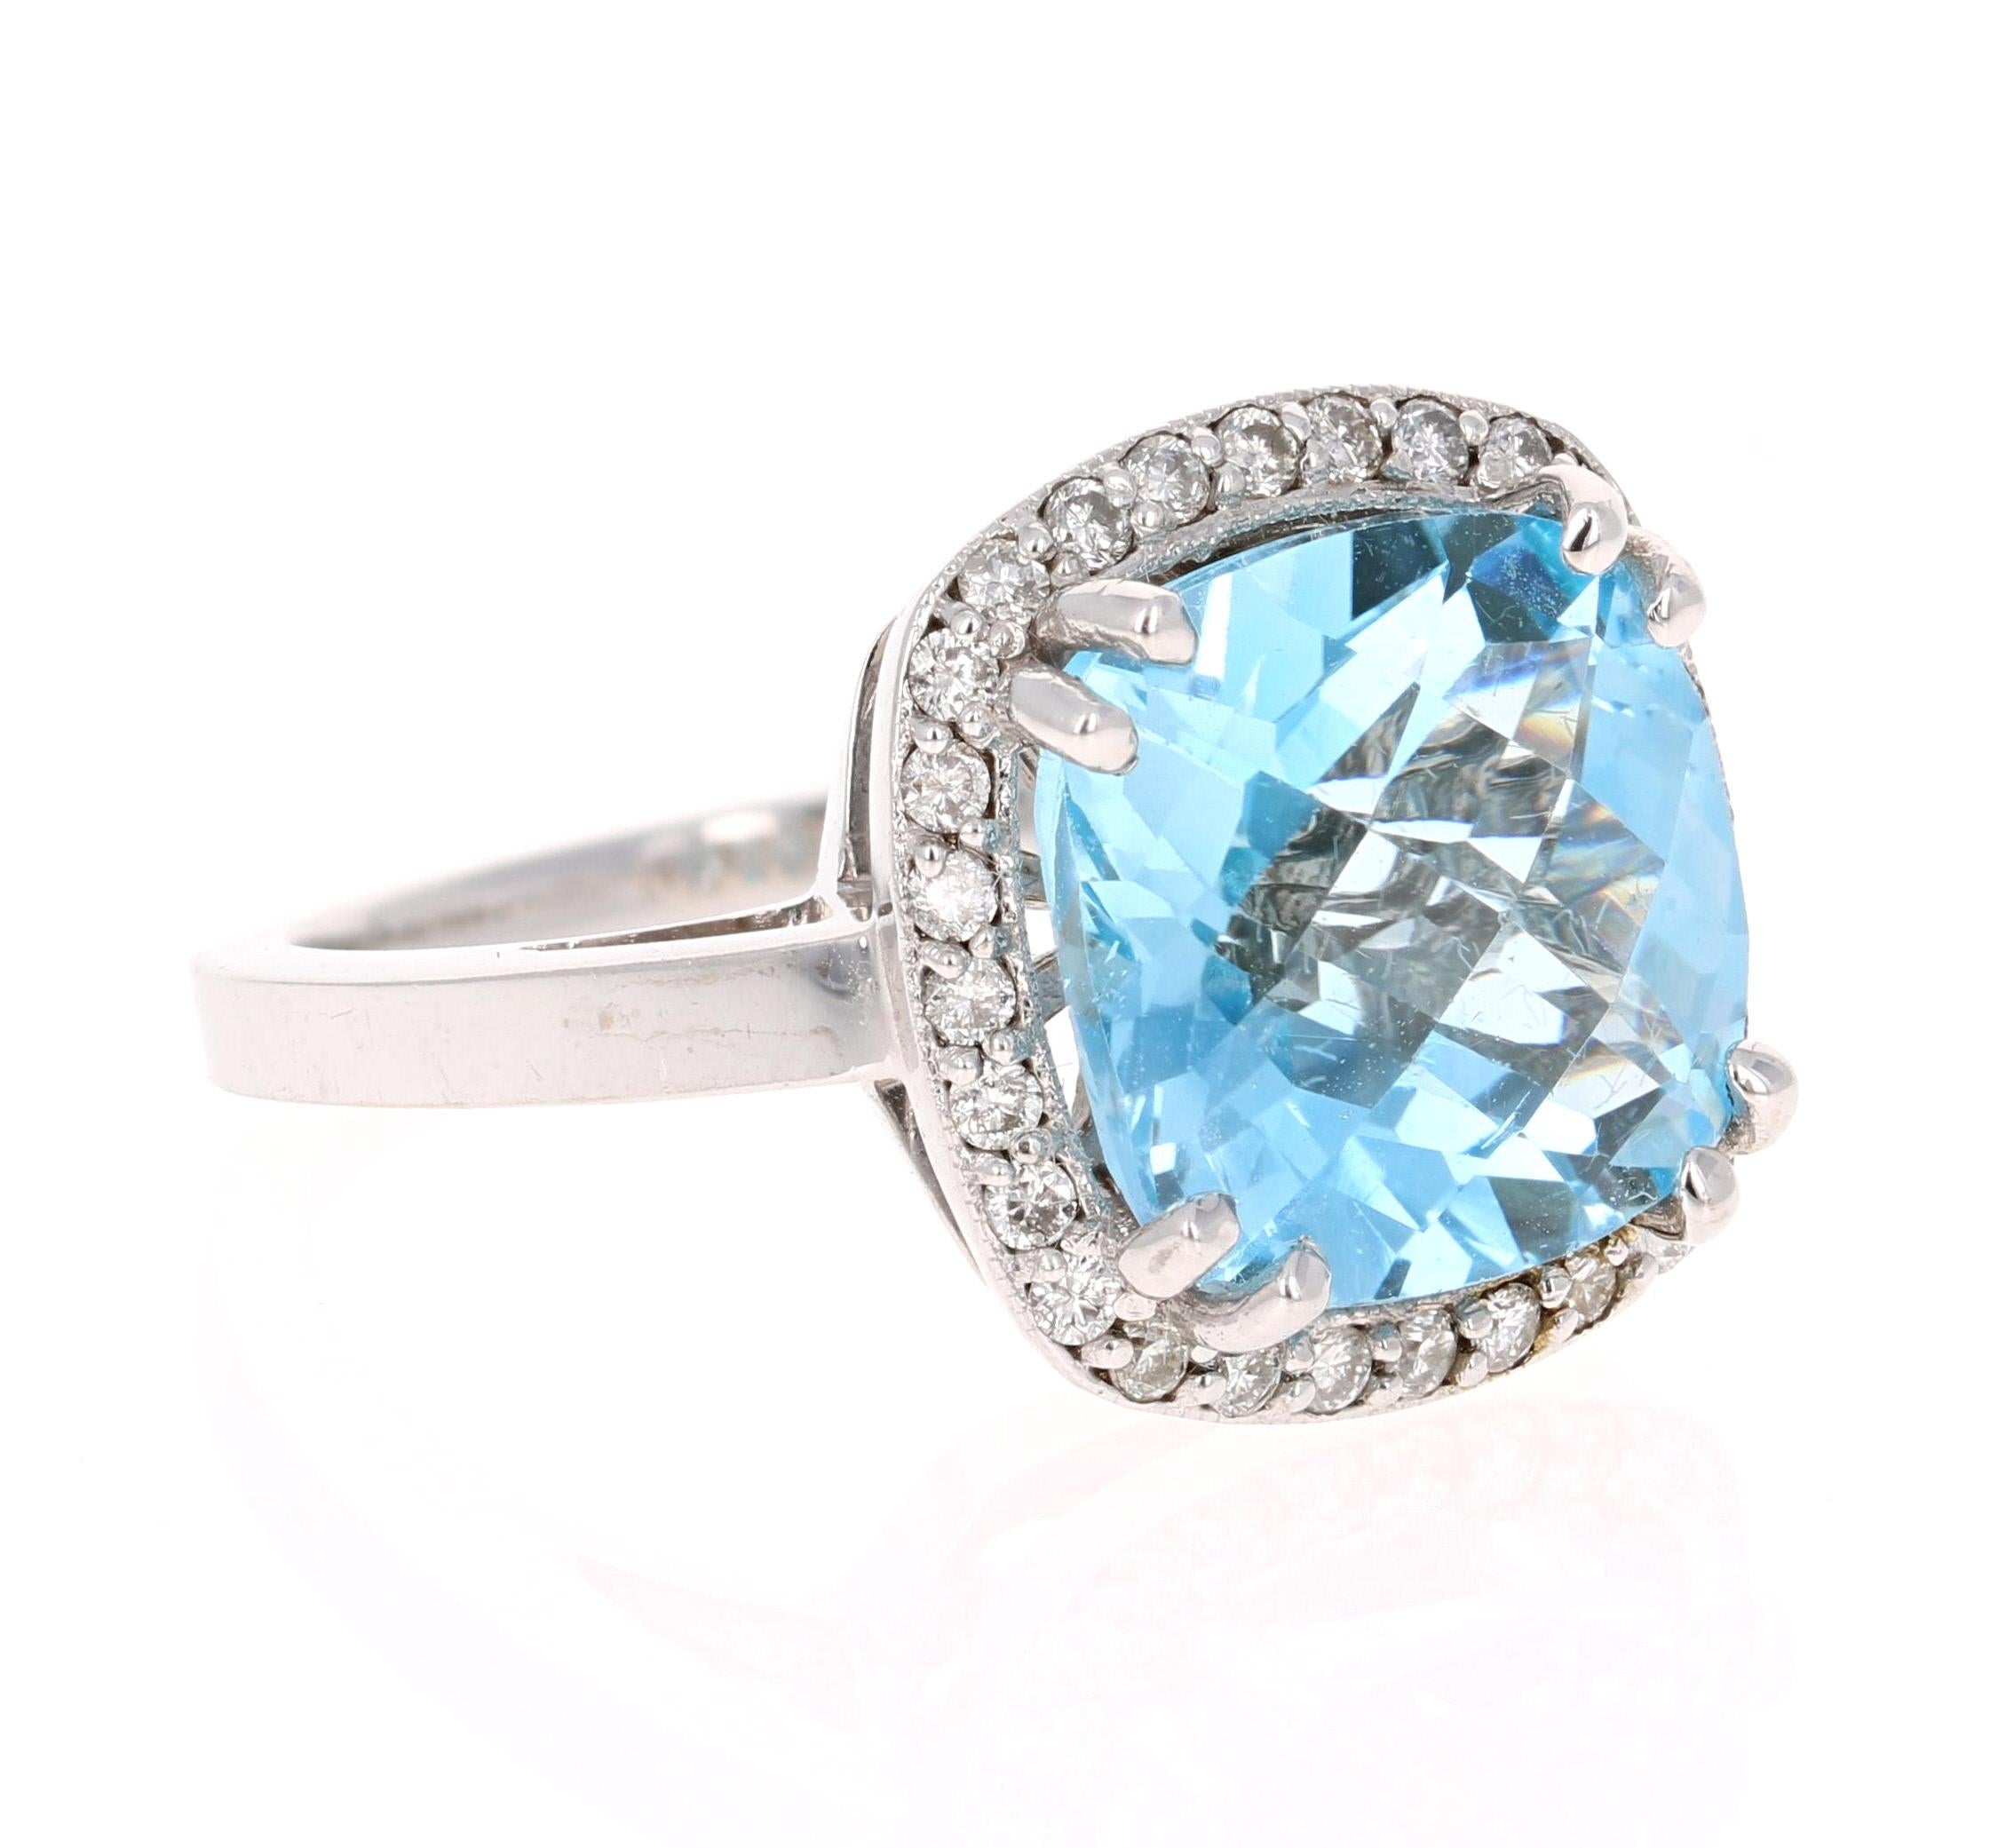 This incredible Square Cushion Cut Blue Topaz and Diamond ring has a stunning and large 8.94 Carat Blue Topaz and its surrounded by a halo of 28 Round Cut Diamonds that weigh 0.39 Carats. The total carat weight of the ring is 9.33 Carats. The